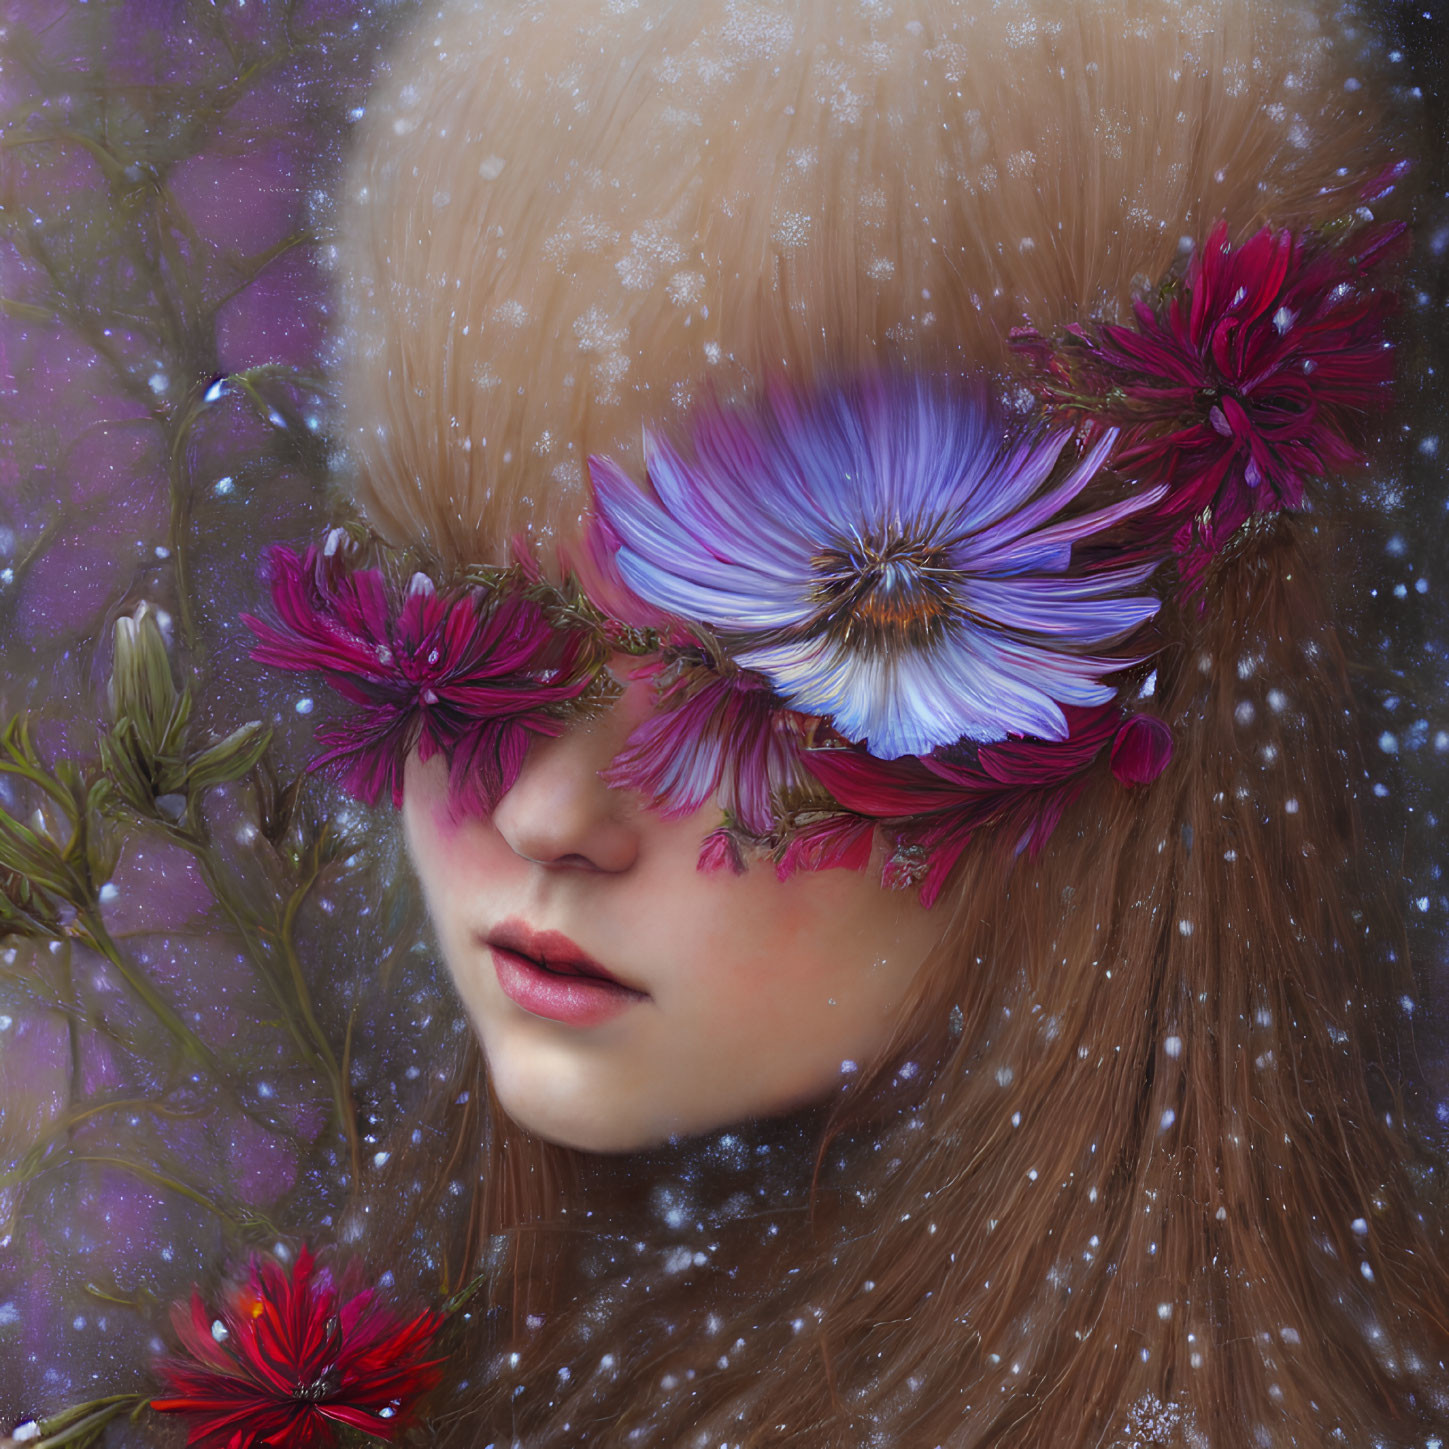 Person with Flower Eyes in Snowy Scene: Floral-Wintry Fusion